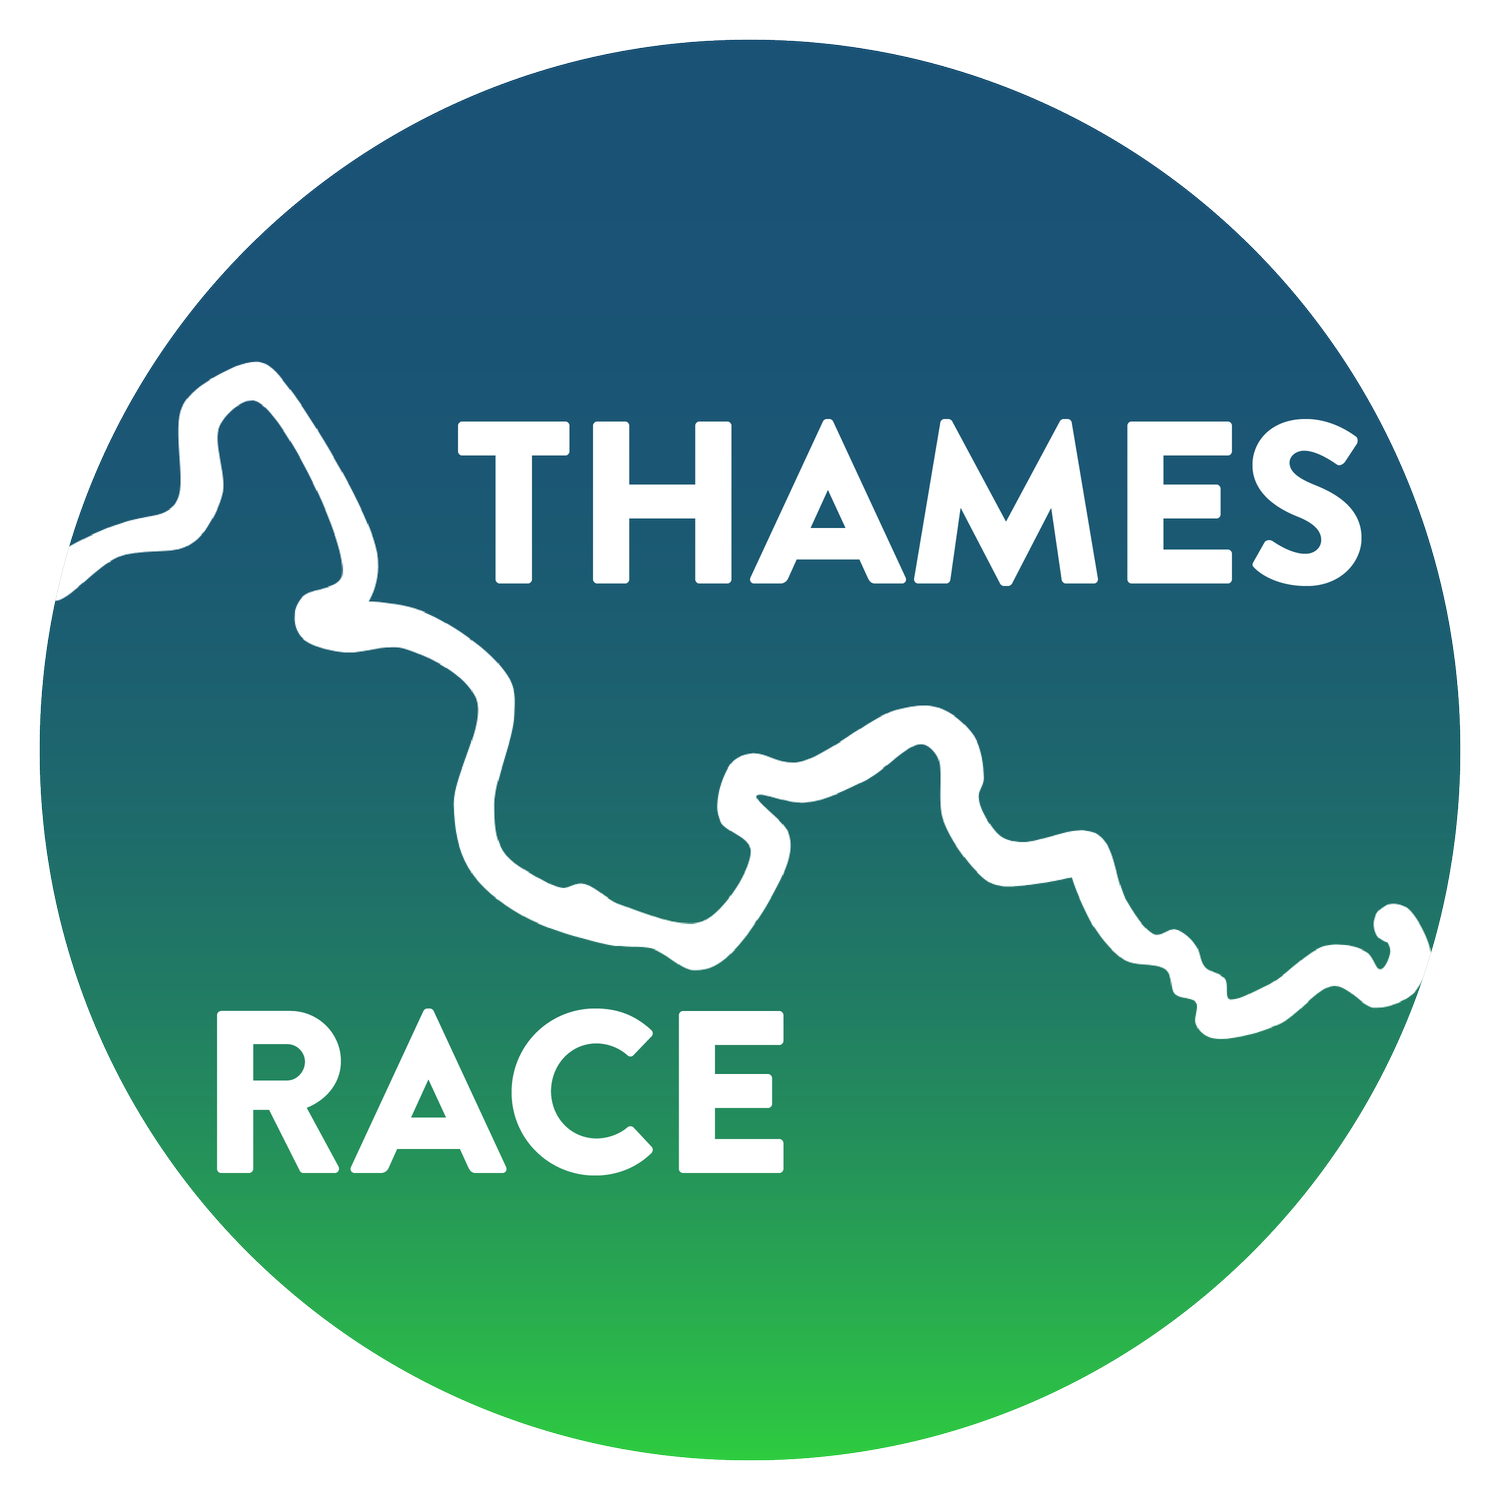 The Thames Race